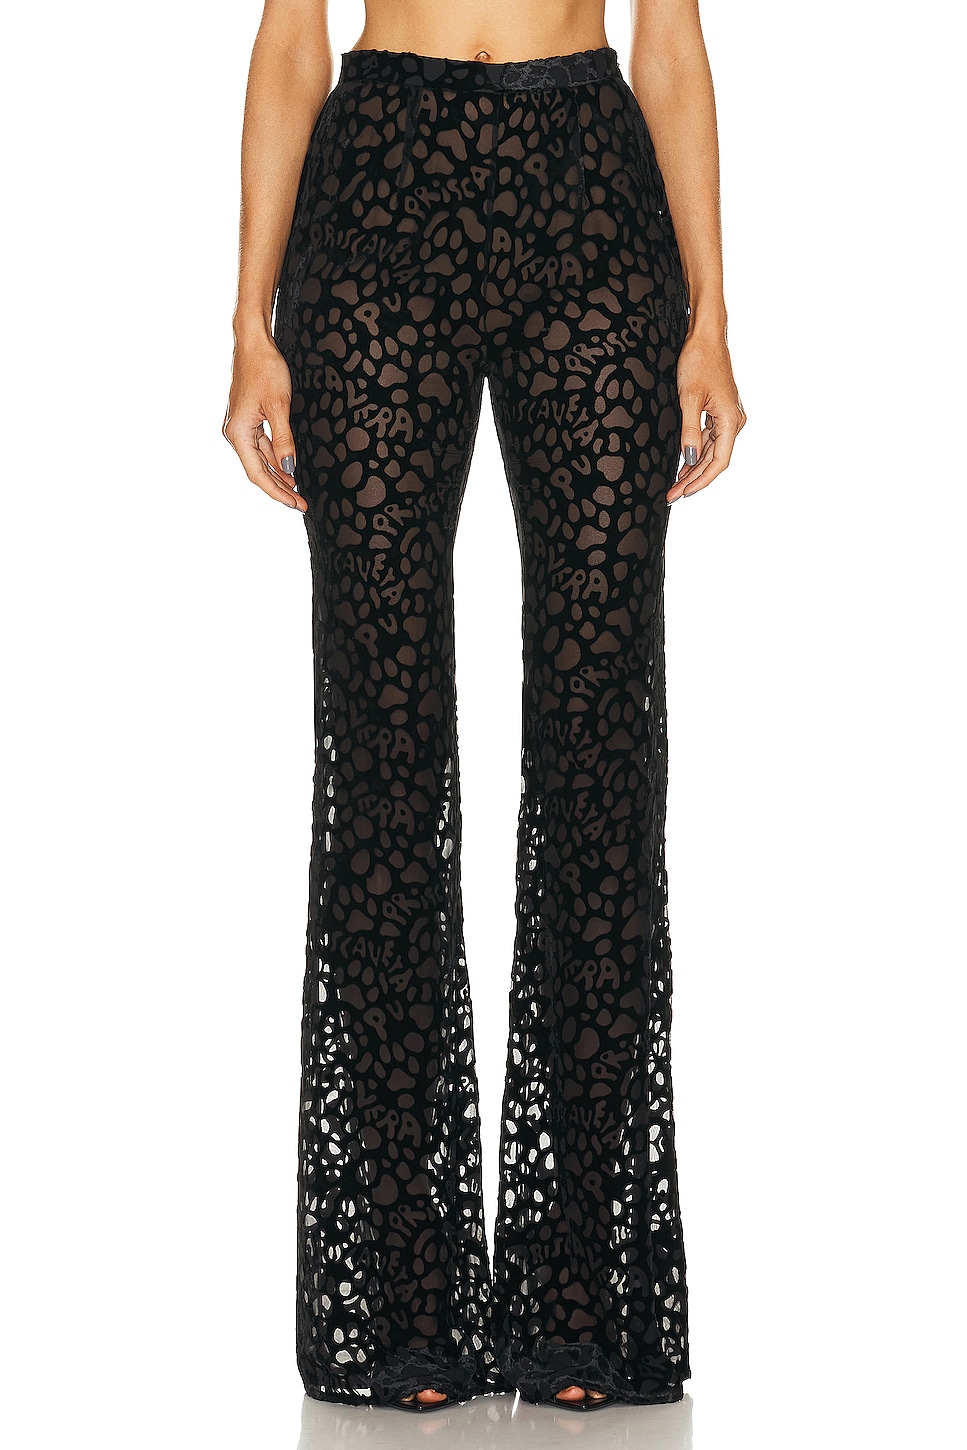 Image 1 of PRISCAVera Fitted Flared Pant in Black